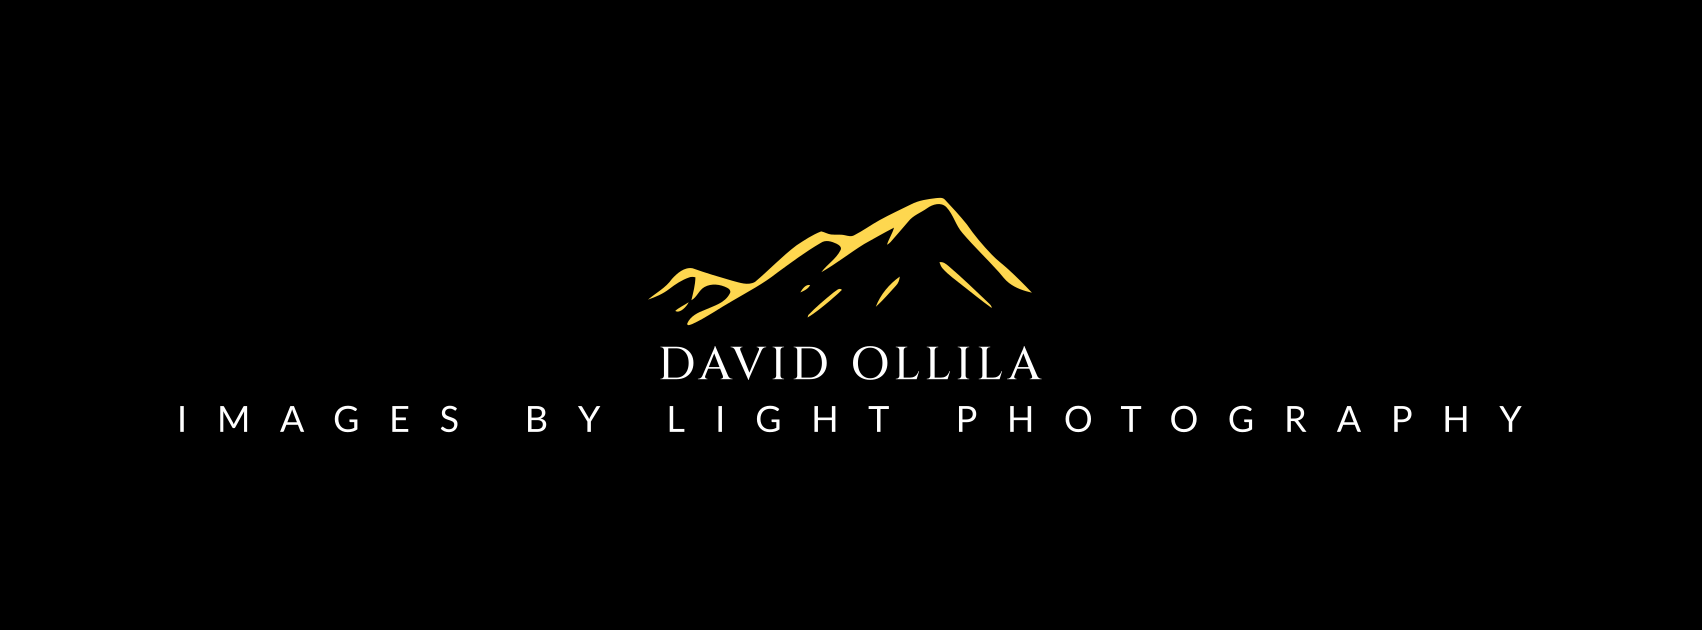 David Ollila | Images by Light Photography